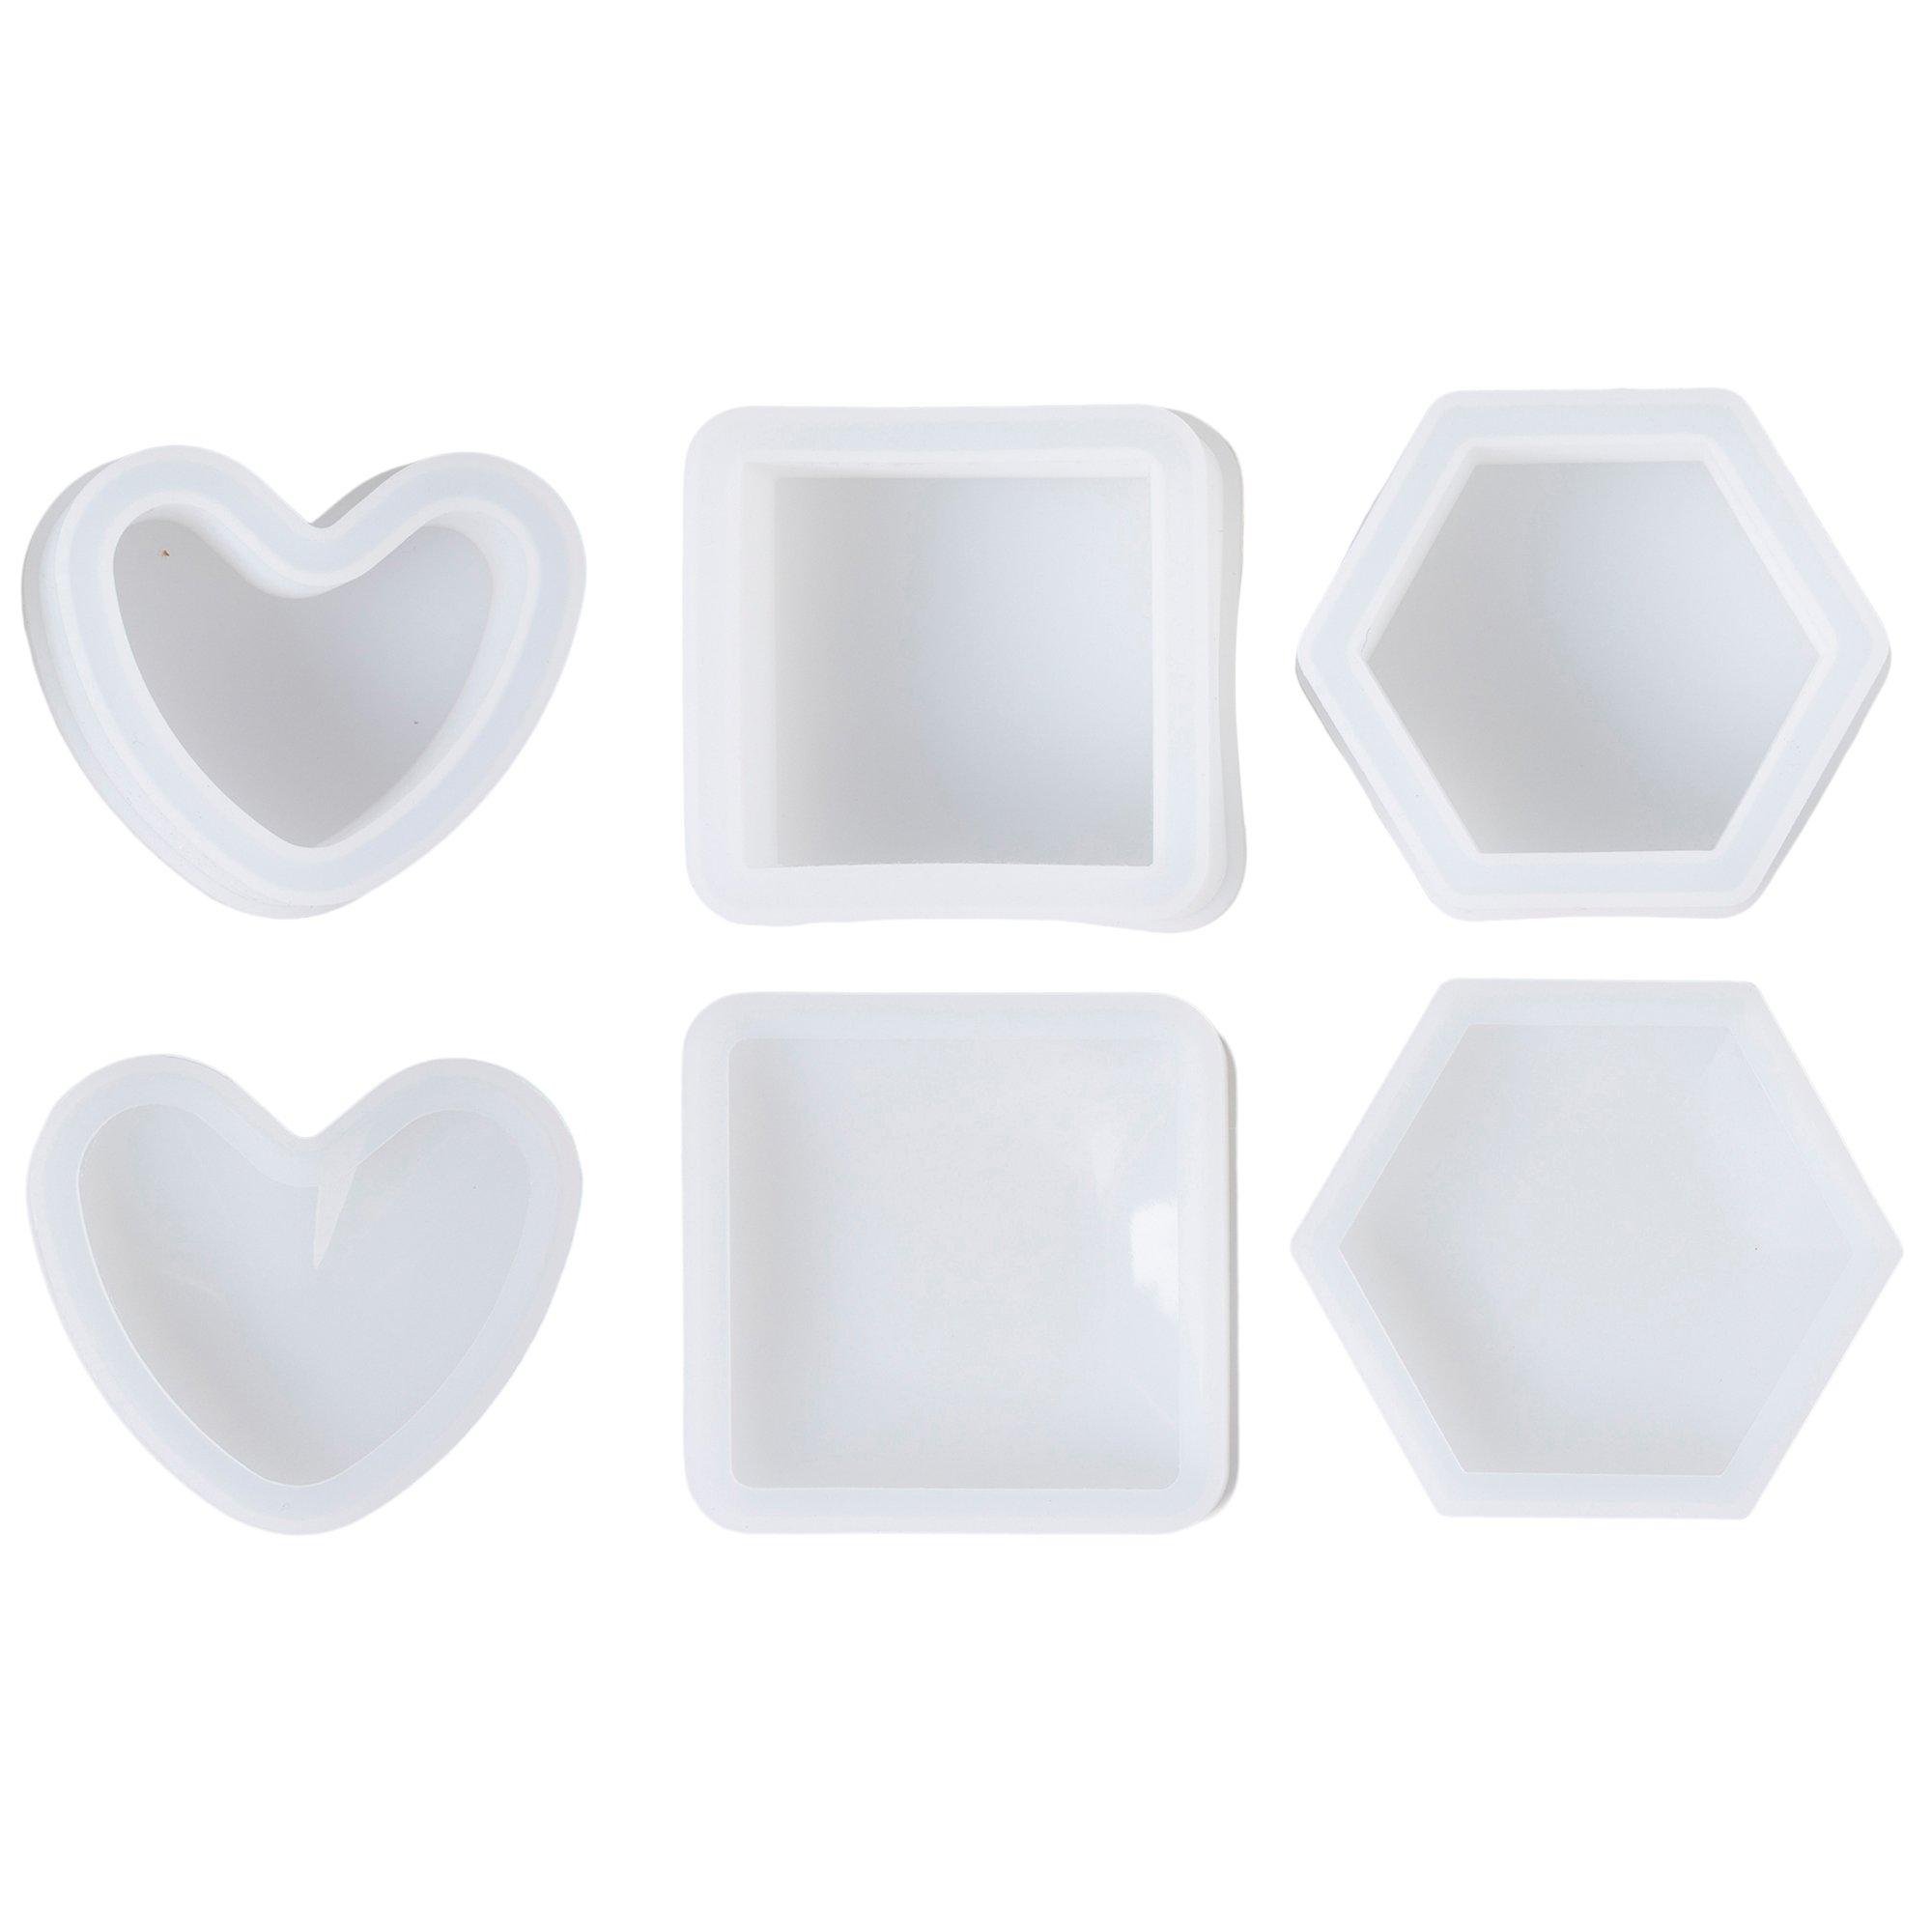 Silicone Resin Mold - Oval Heart and Square - 3 Piece